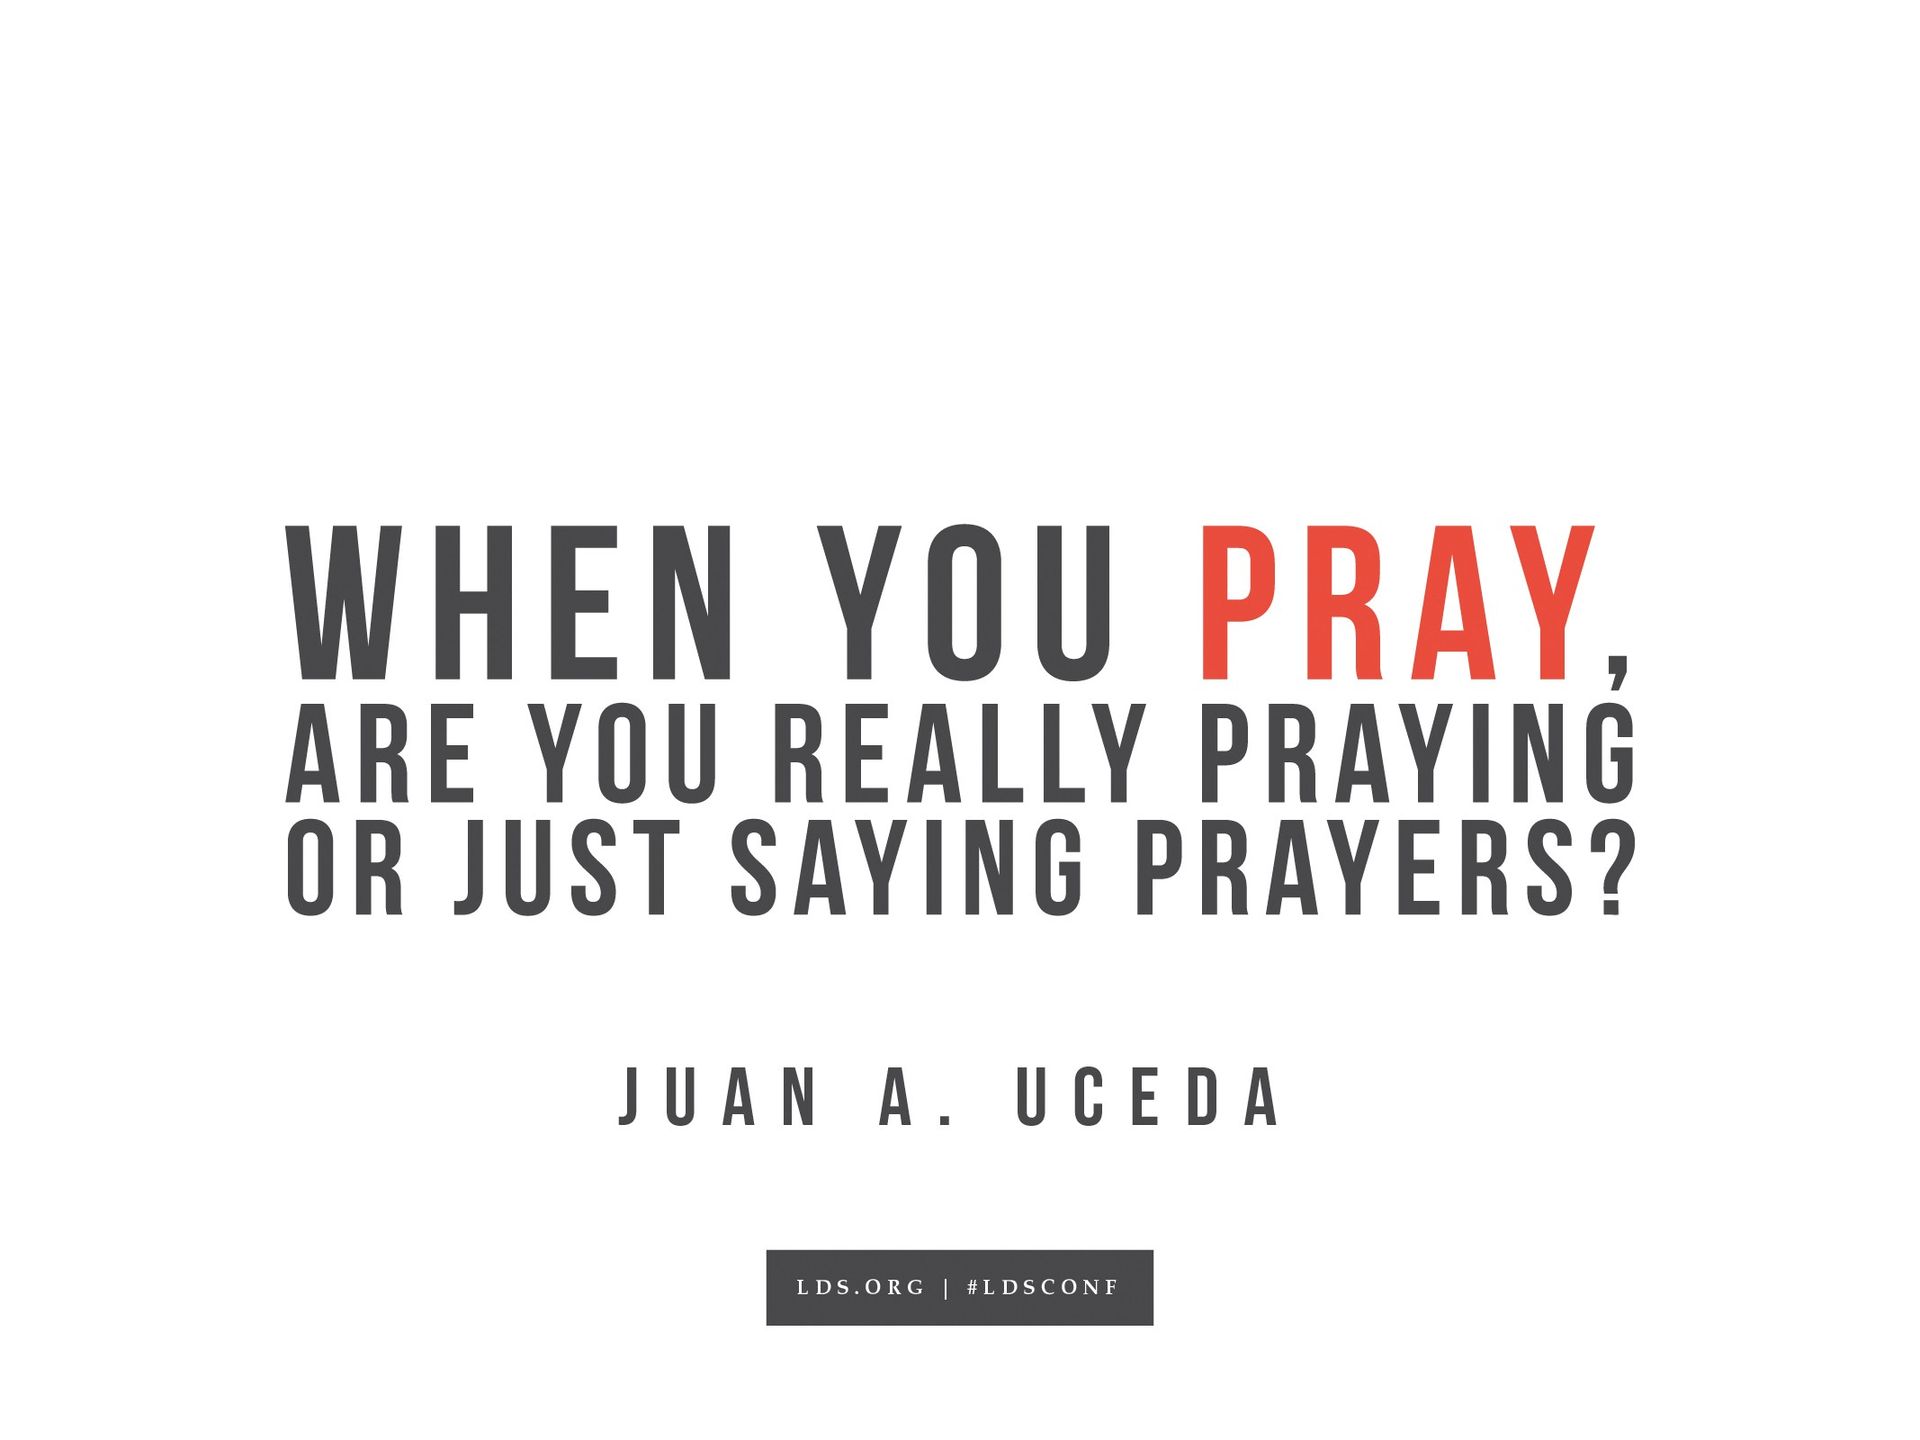 “When you pray, are you really praying or just saying prayers?”—Juan A. Uceda, “The Lord Jesus Christ Teaches Us to Pray”